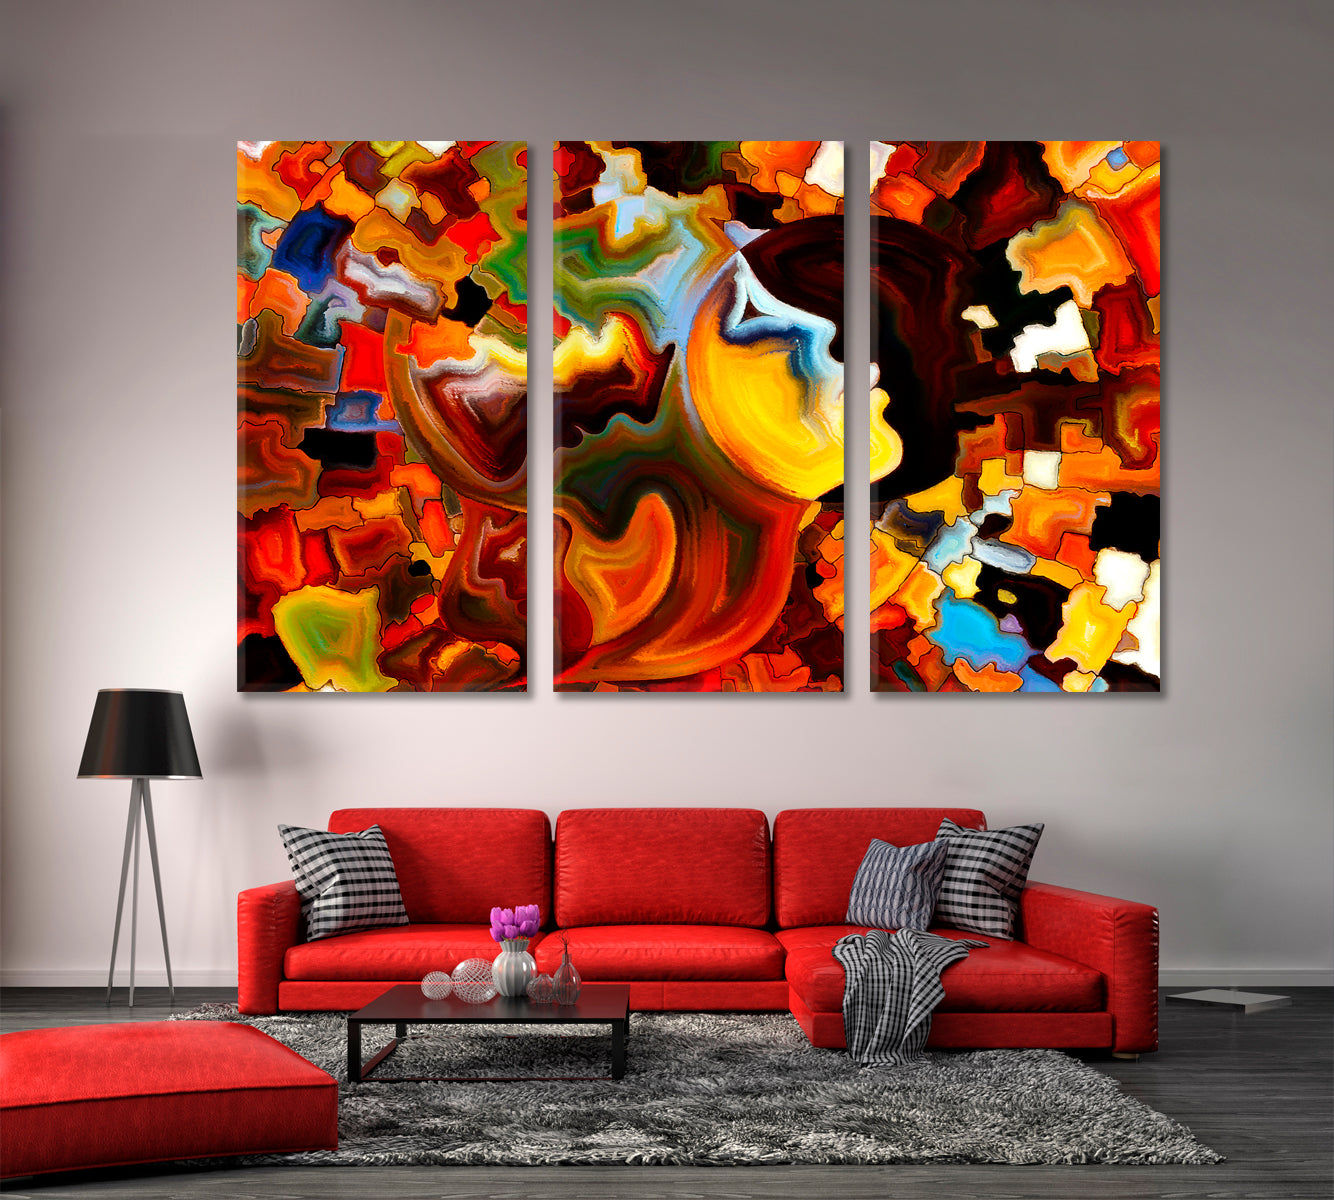 Colors And People Contemporary Art Artesty 3 panels 36" x 24" 